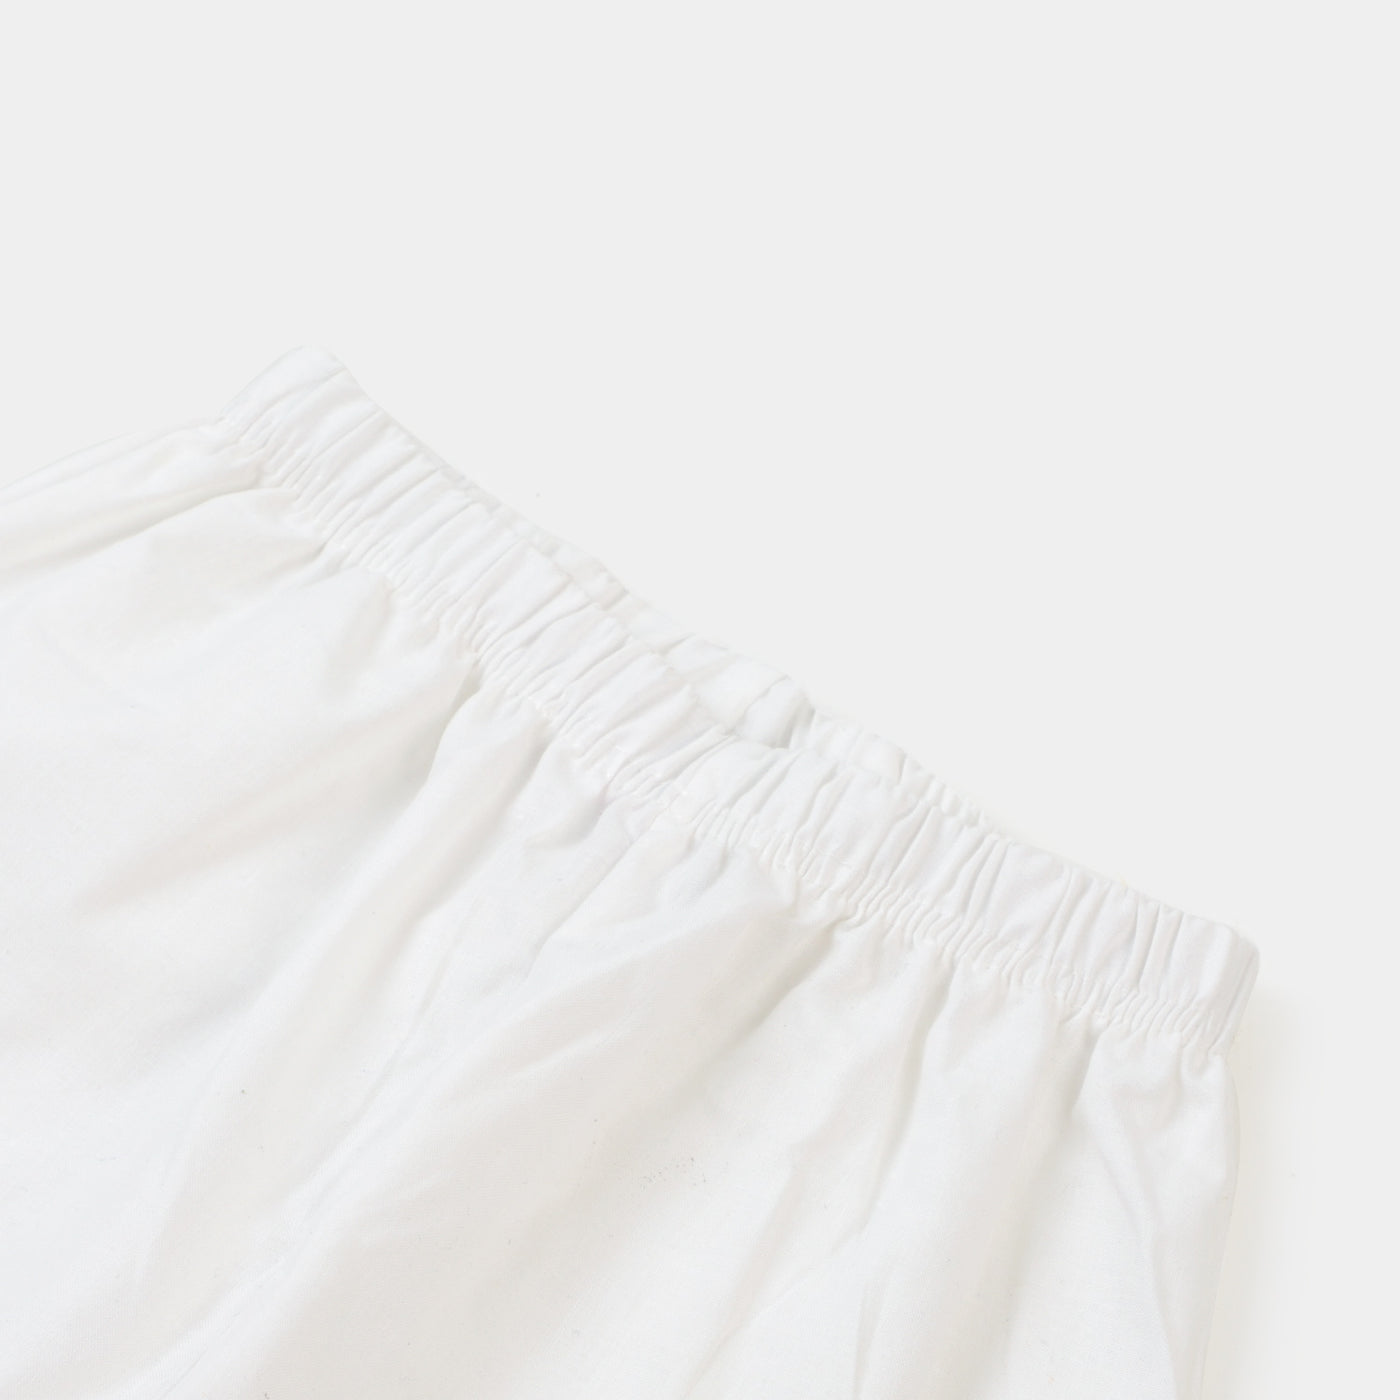 Girls Eastern Embroidered Pant - White